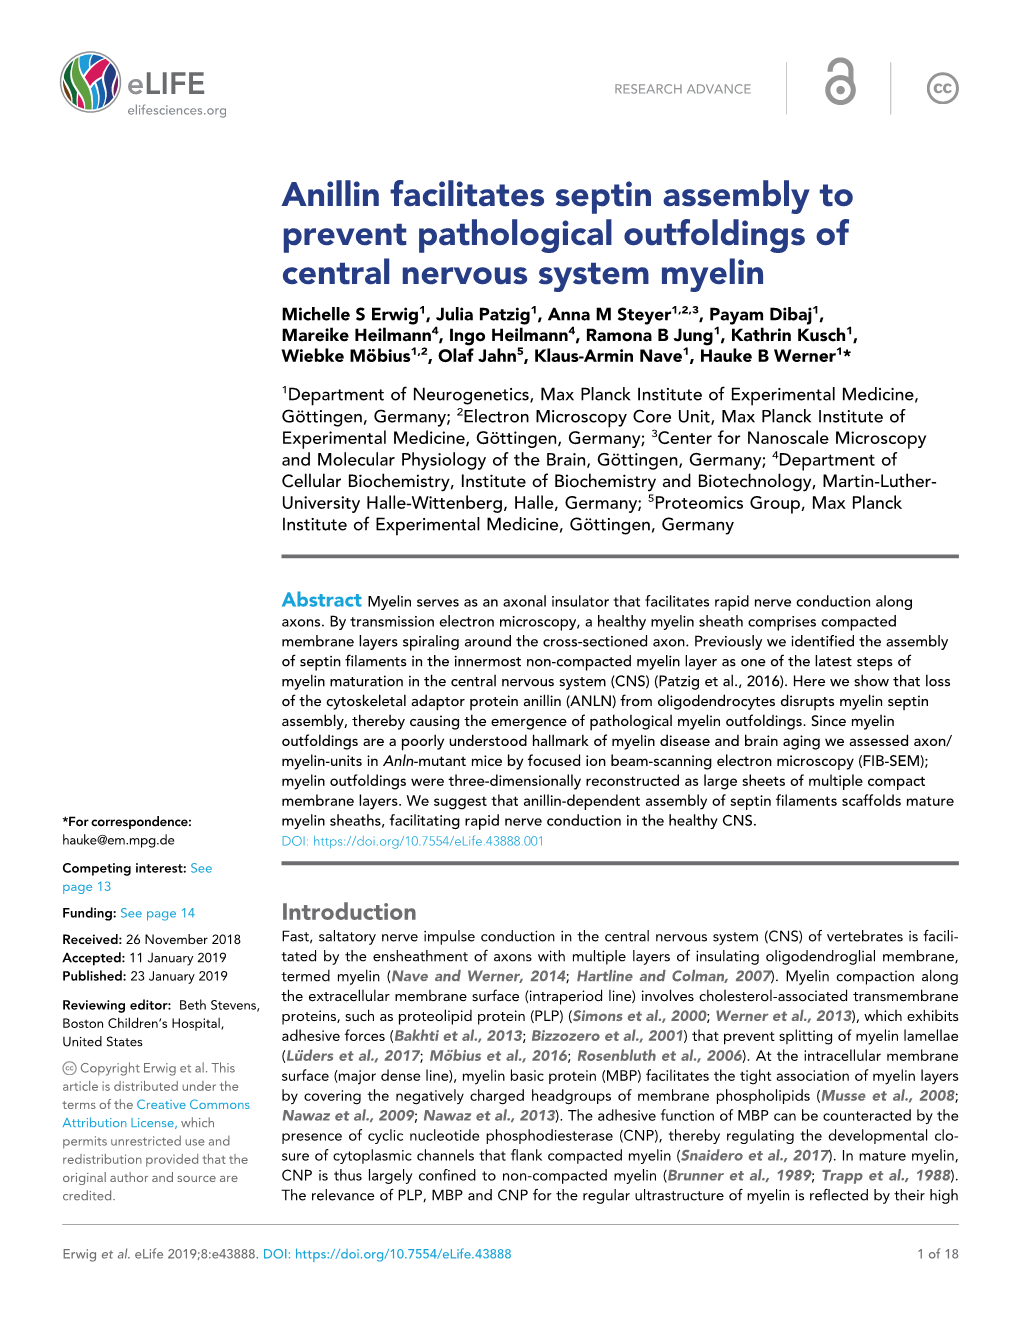 Anillin Facilitates Septin Assembly to Prevent Pathological Outfoldings Of